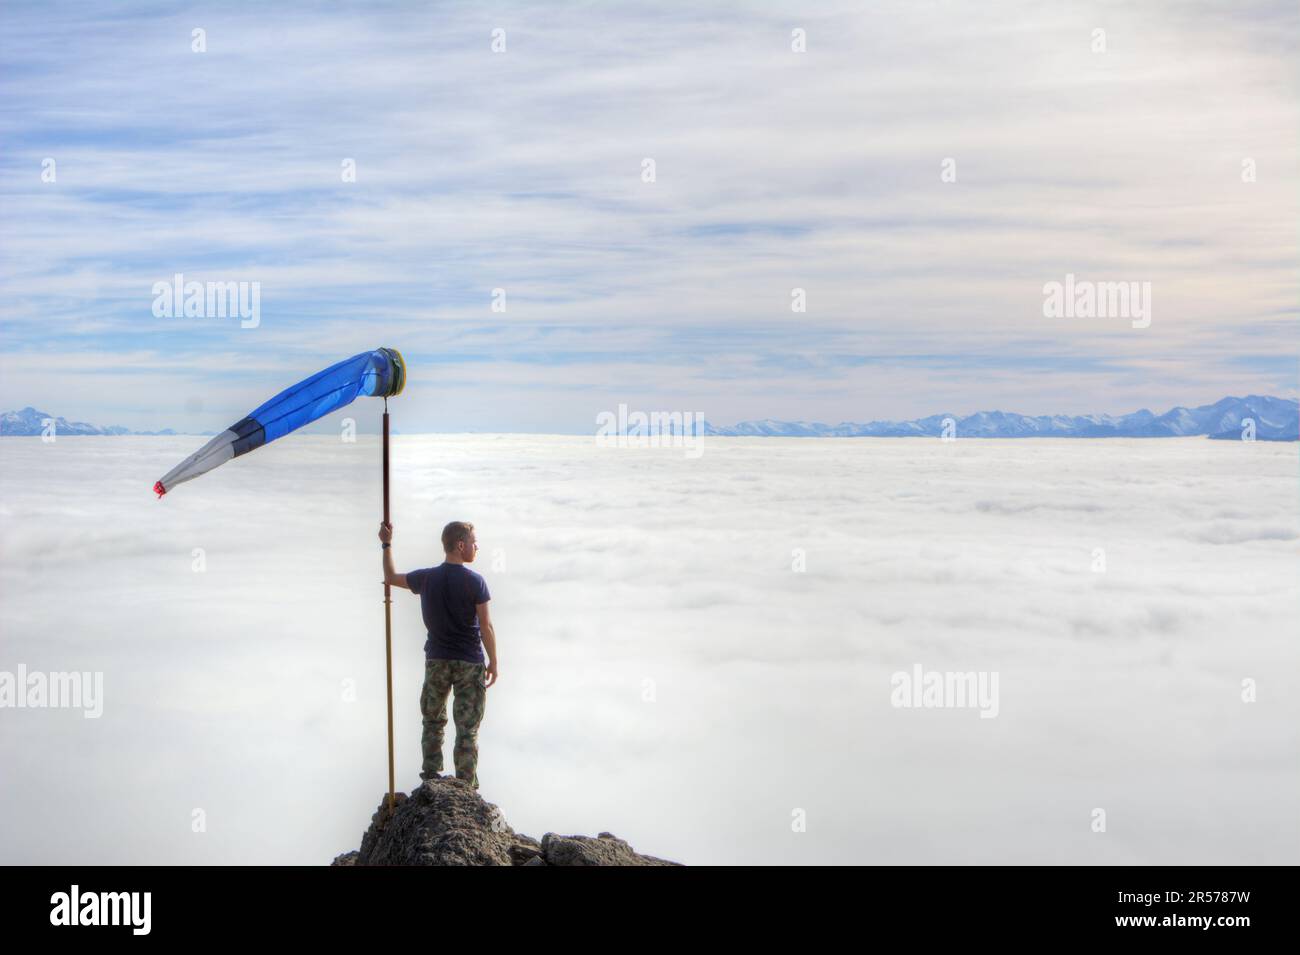 A man with a tall weather vane looks from above at the snowless clouds covering a mountain valley in Bariloche, Argentina Stock Photo